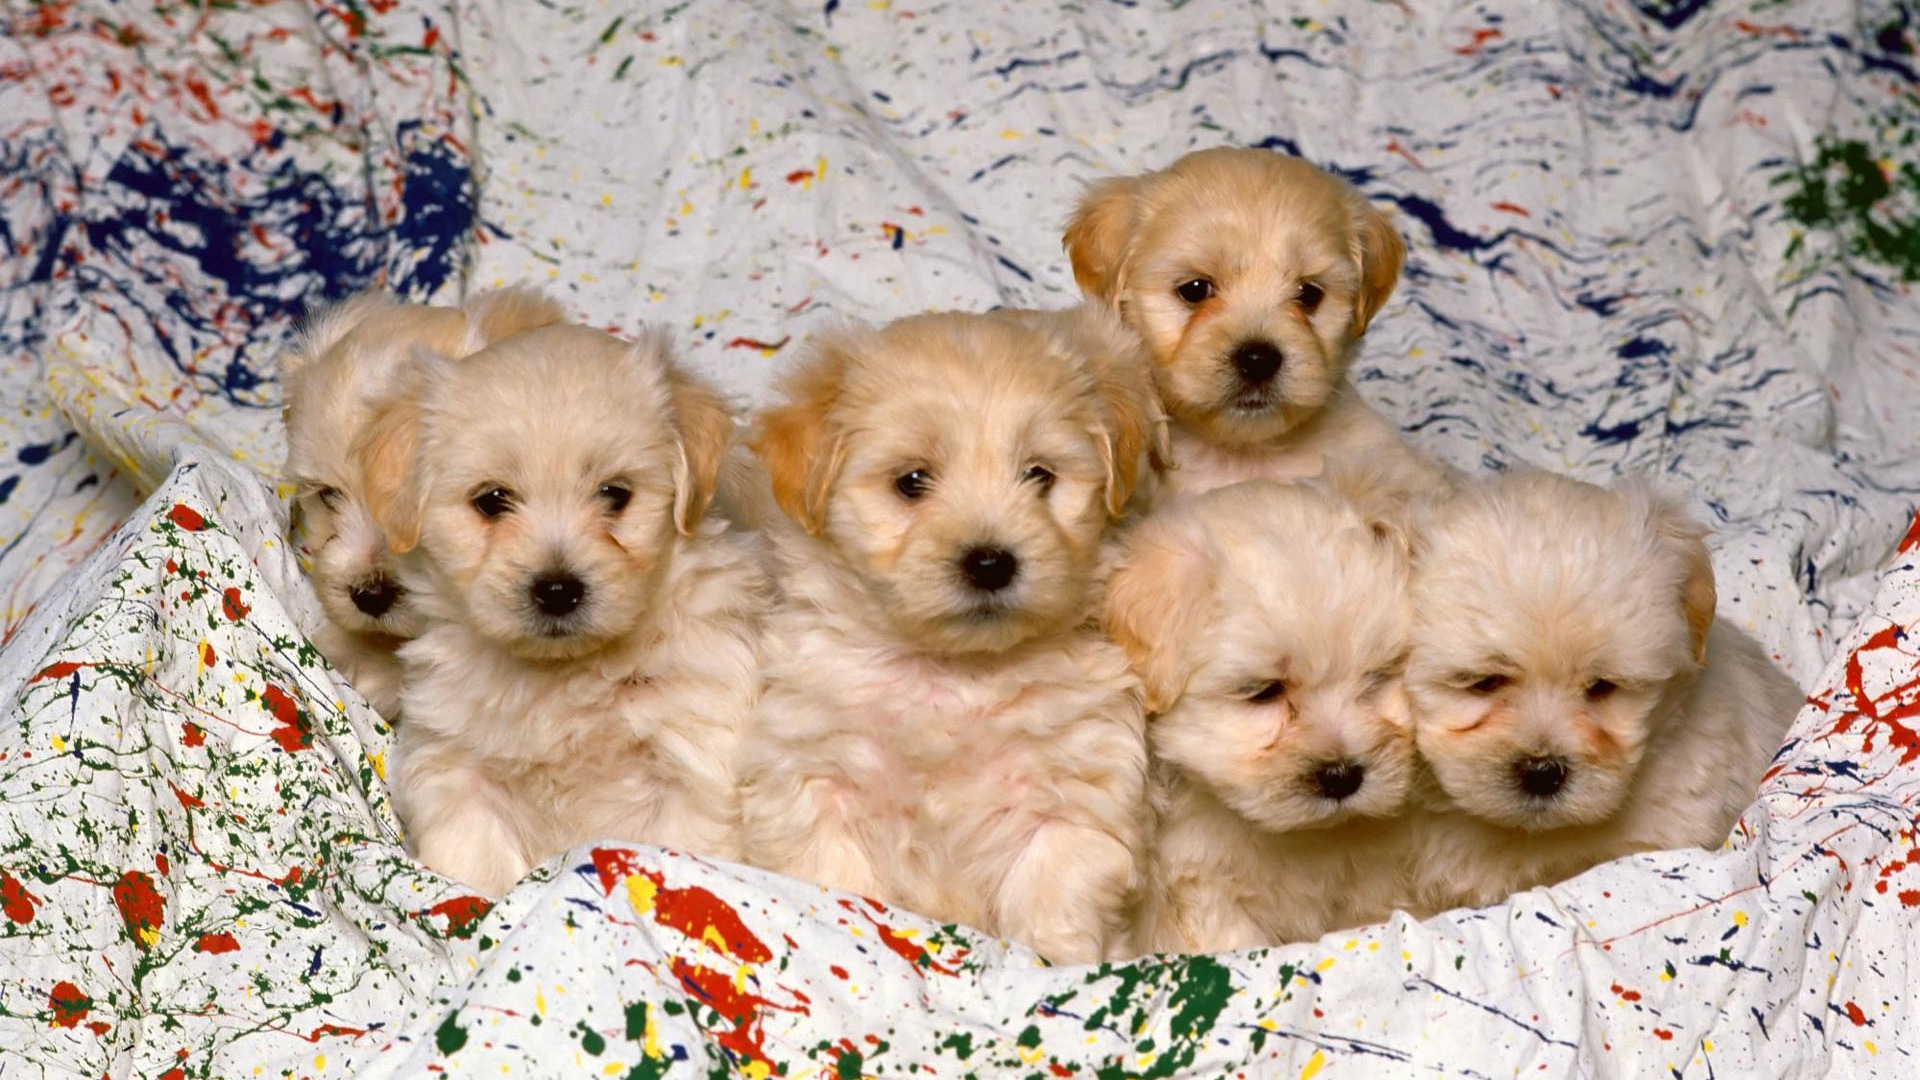 Puppy Photo HD wallpapers (1) #17 - 1920x1080